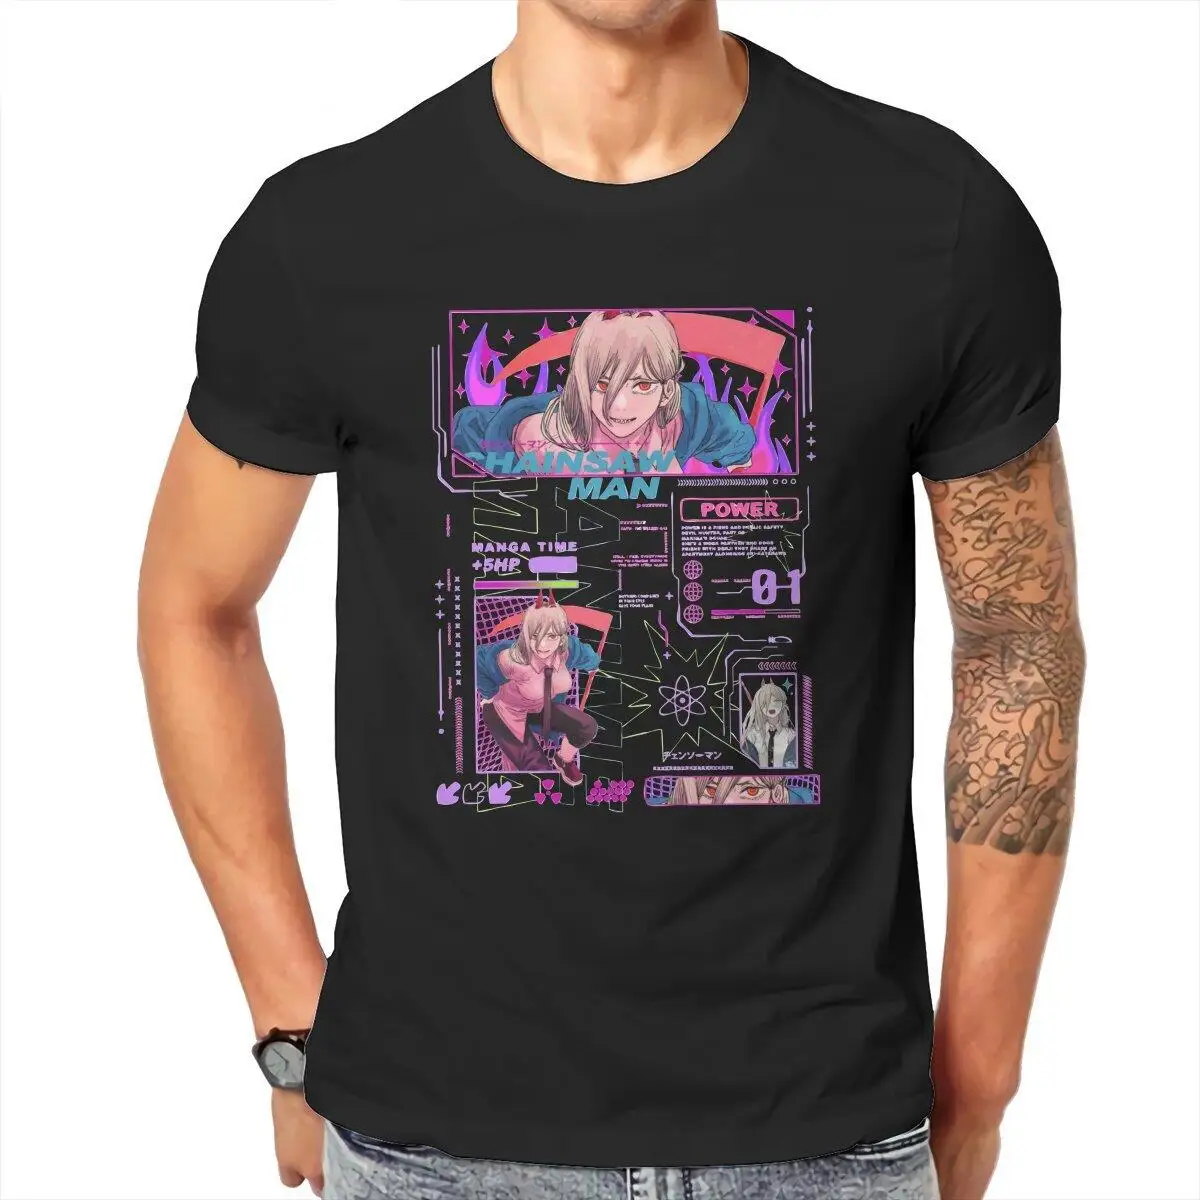 Casual Chainsaw Man Power Manga  T-Shirt Men Round Collar Pure Cotton T Shirts  Short Sleeve Tees New Arrival Clothing